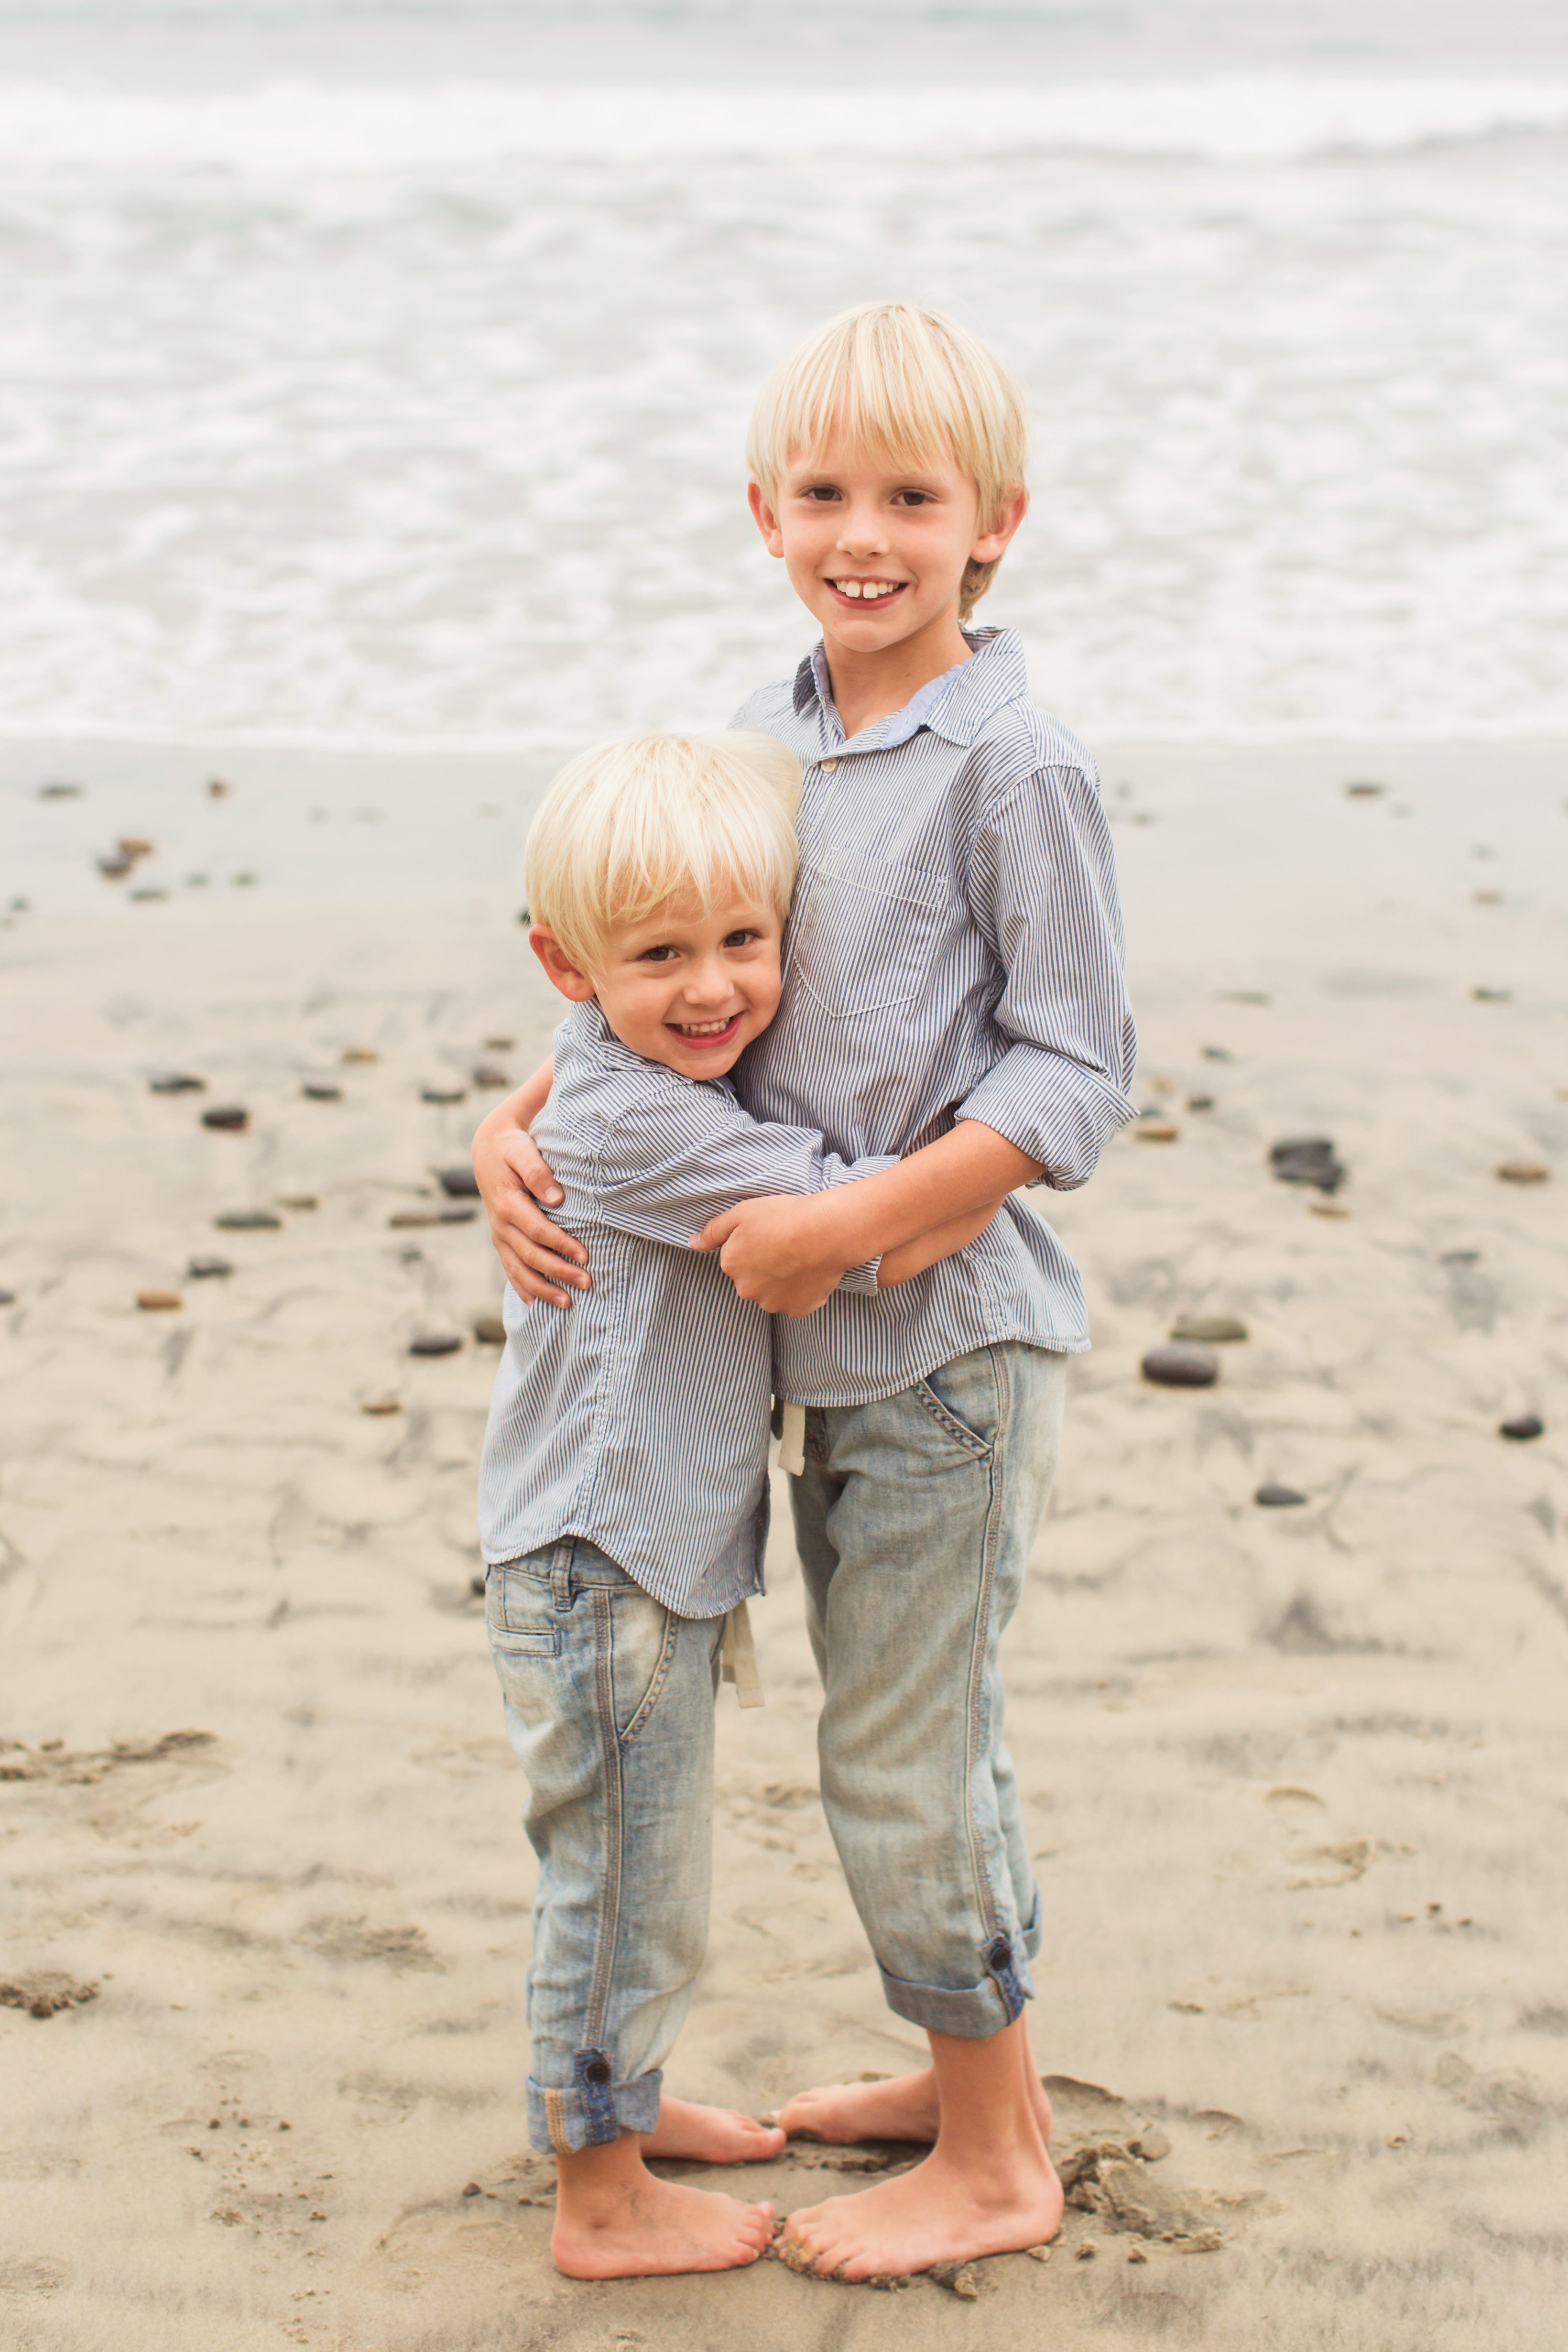 All the way from Austin! | Carlsbad Family Photographer